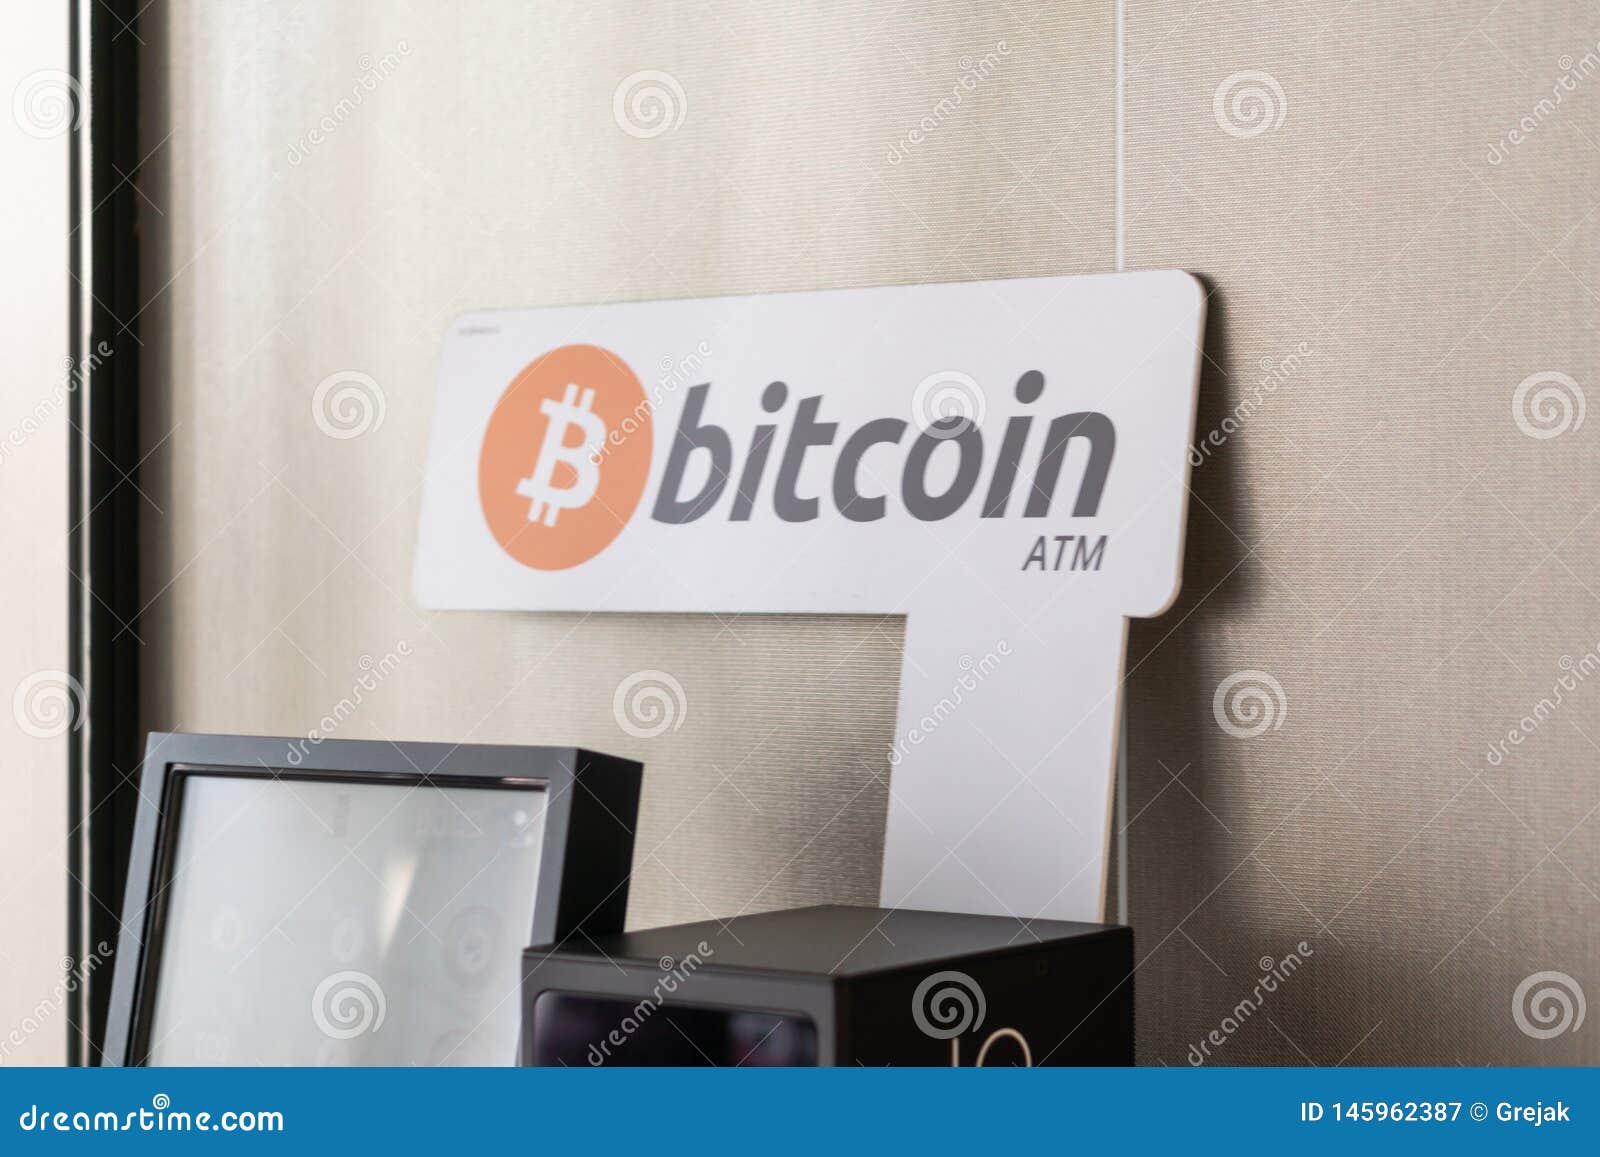 Close Up Photo Of Bitcoin Atm Sign Used For Buying And Selling - 